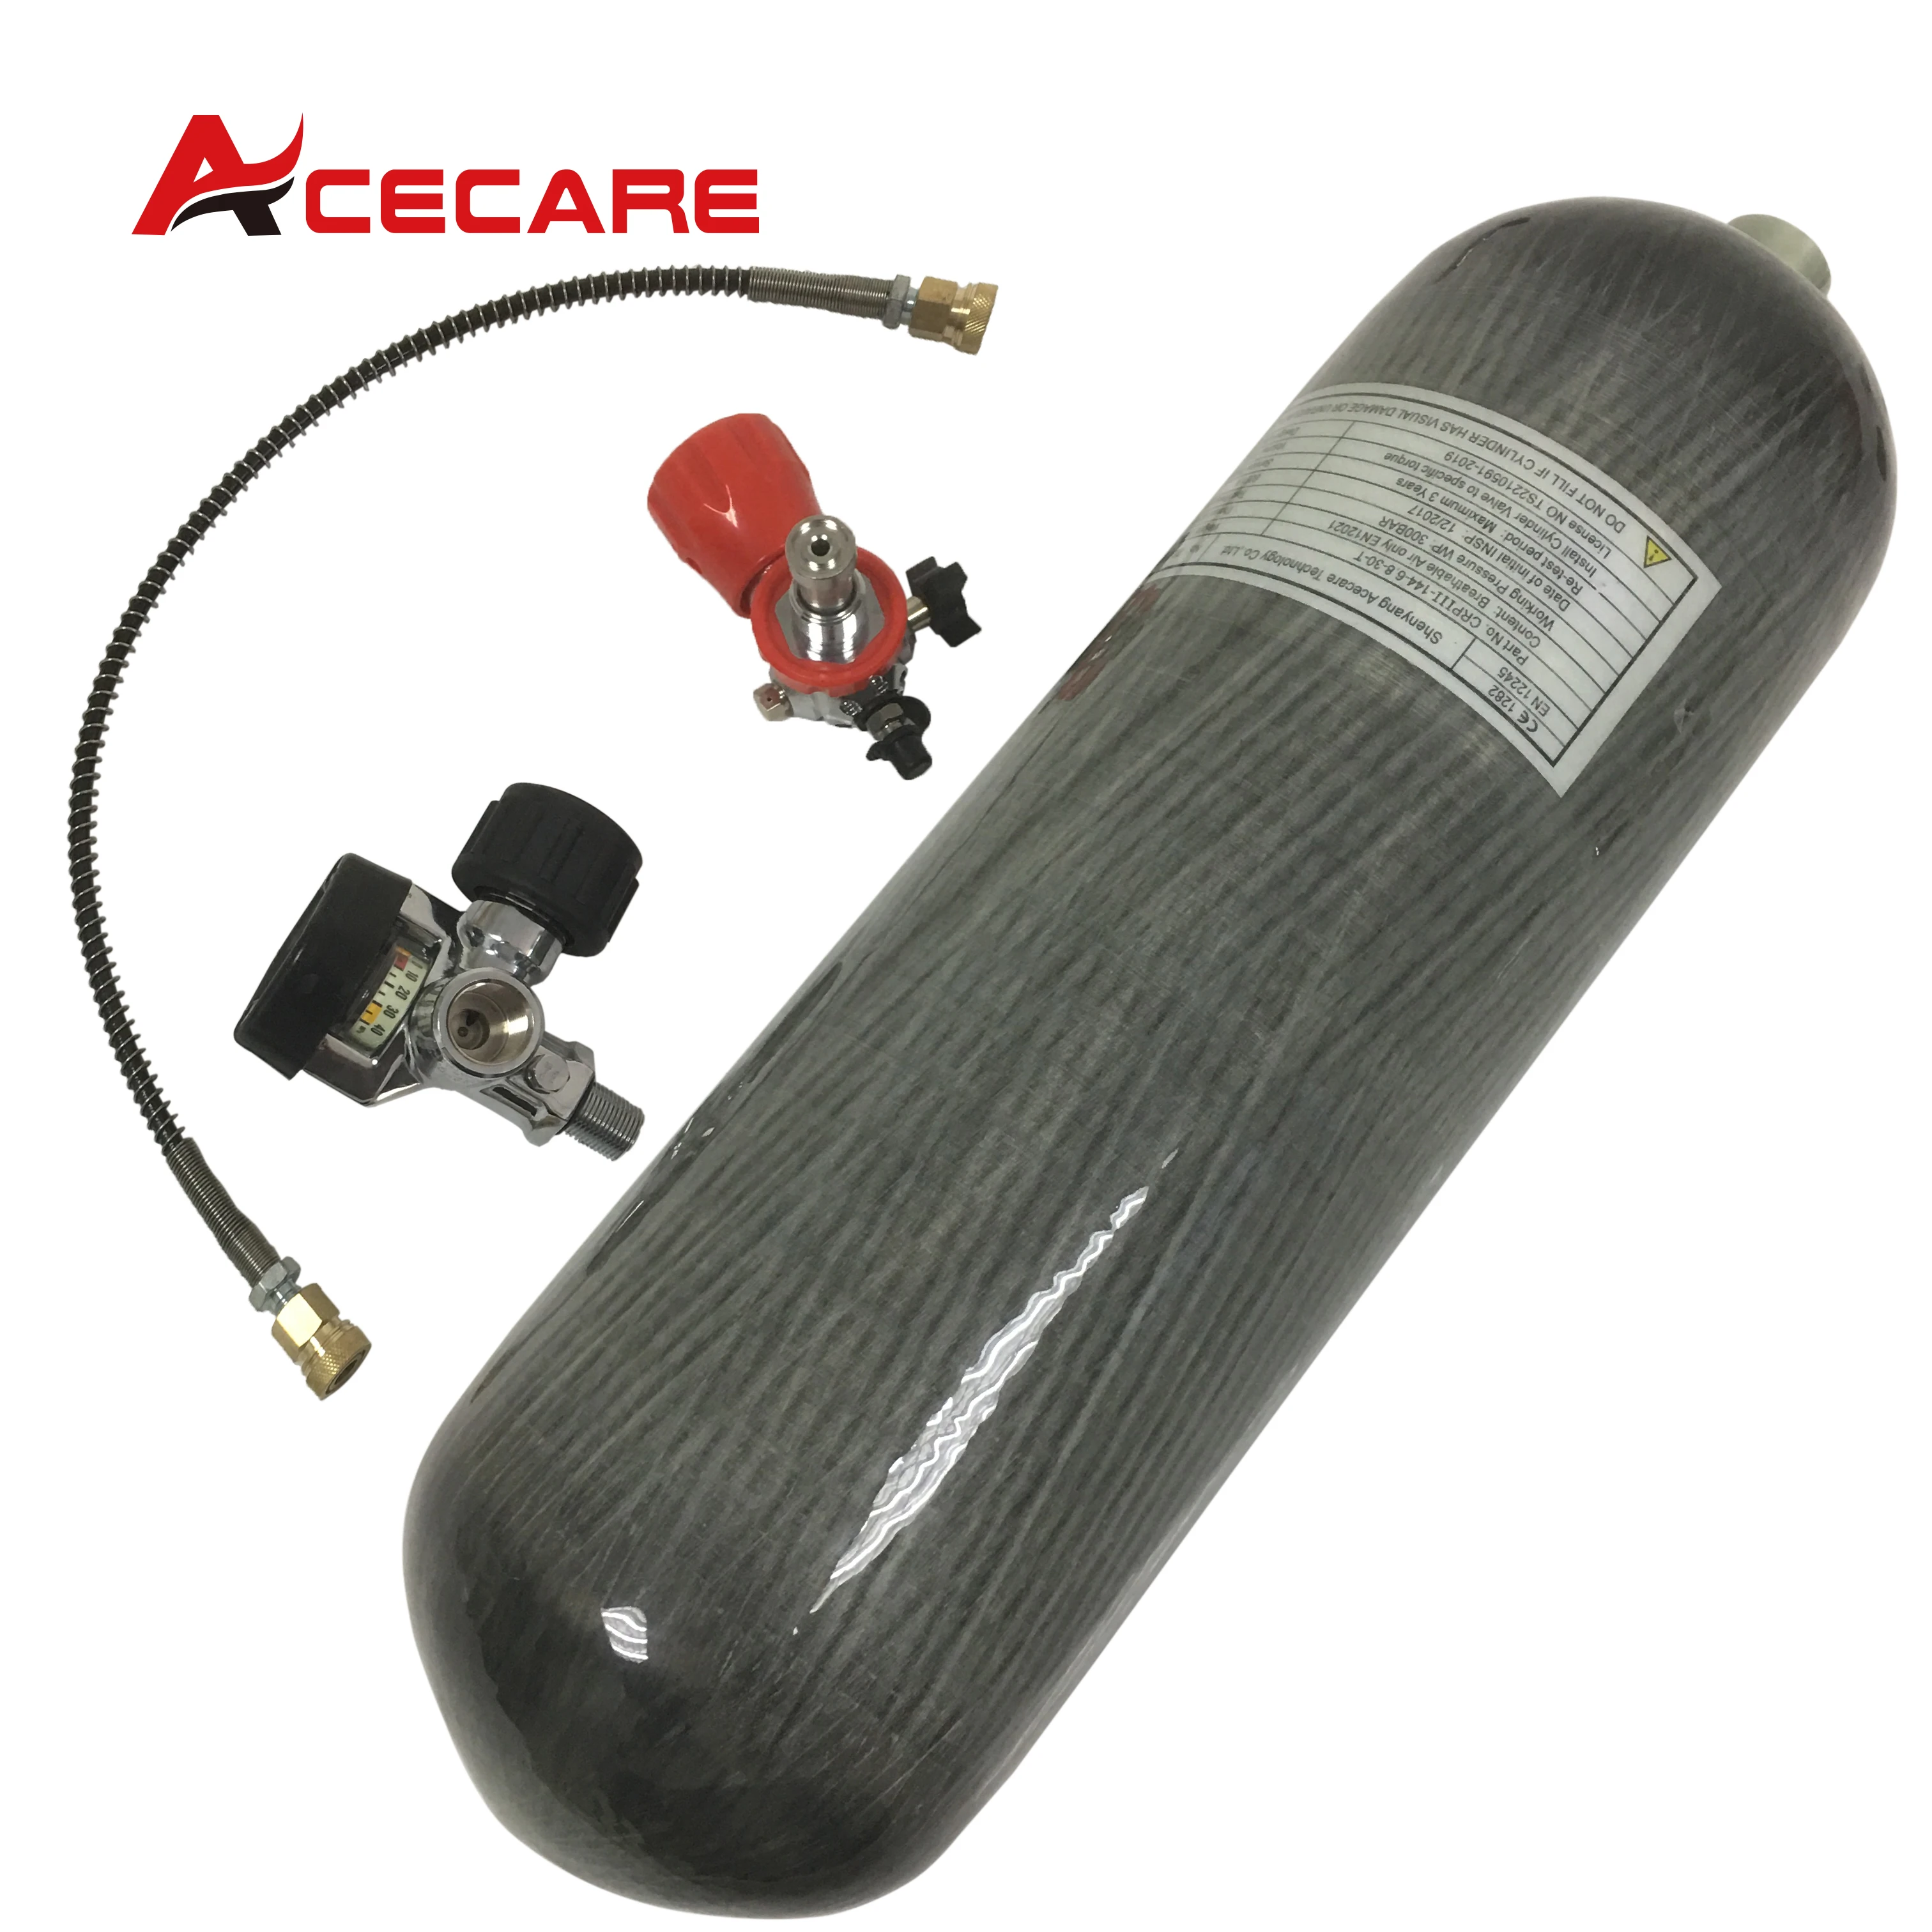 Acecare Carbon Fiber Hpa Air Tank 6.8L 4500psi Pressure Gauge Valve and Filling Station M18*1.5 SCBA Diving Fire Protection ac9091 acecare pcp valve filling station m18 1 5 thread 4500psi pcp hpa paintball tank 300bar compressed airforce condor rifle